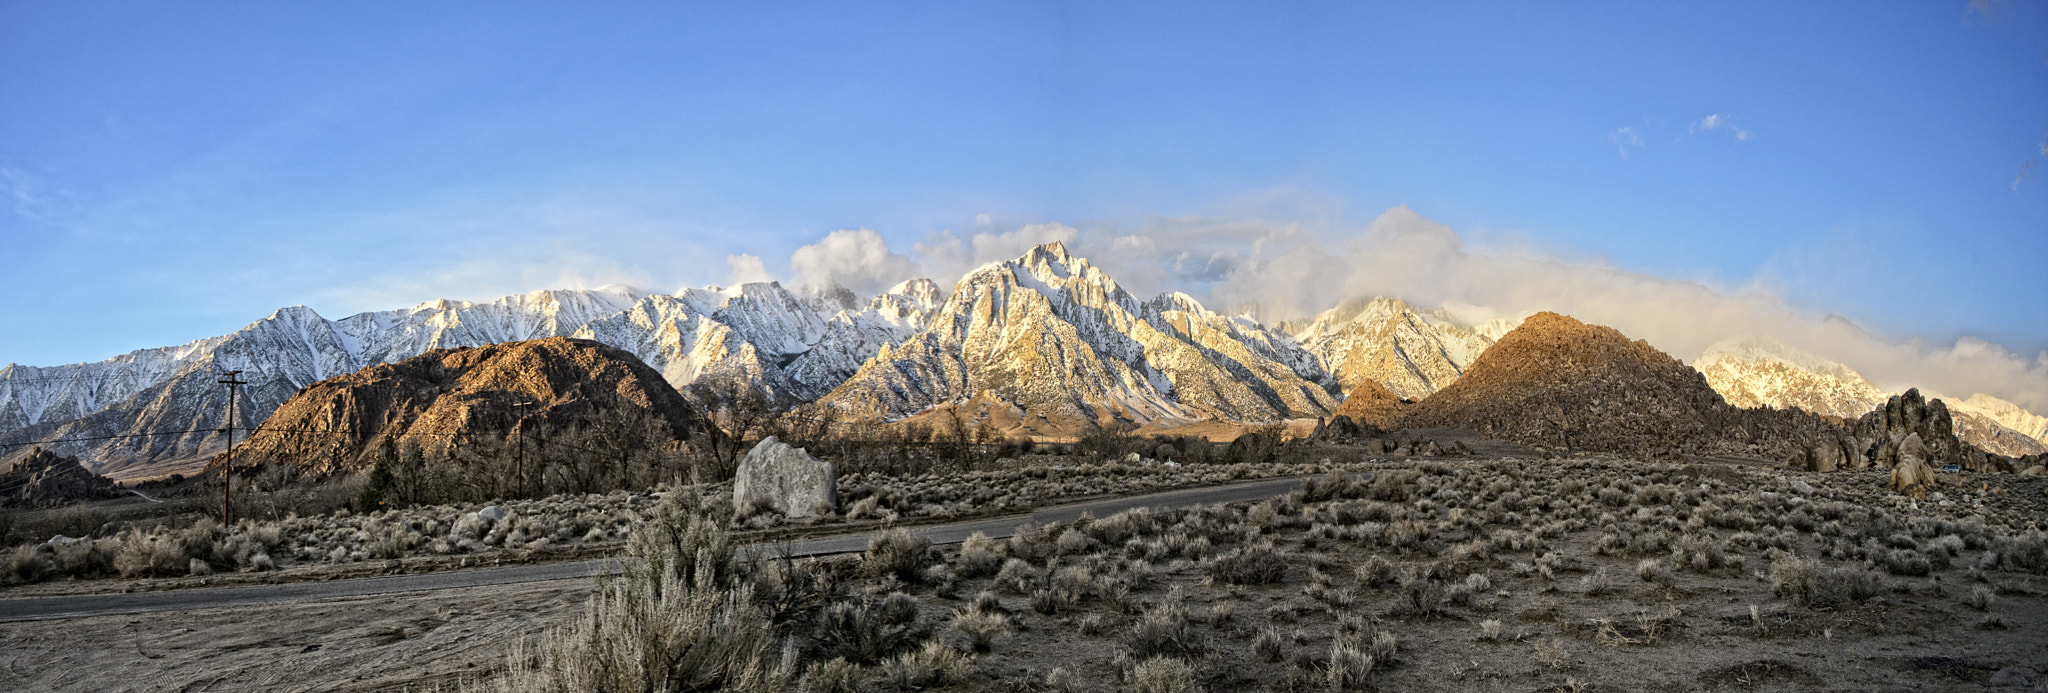 Nikon D4 sample photo. Eastern front of sierra nevada's at mt. whitney photography